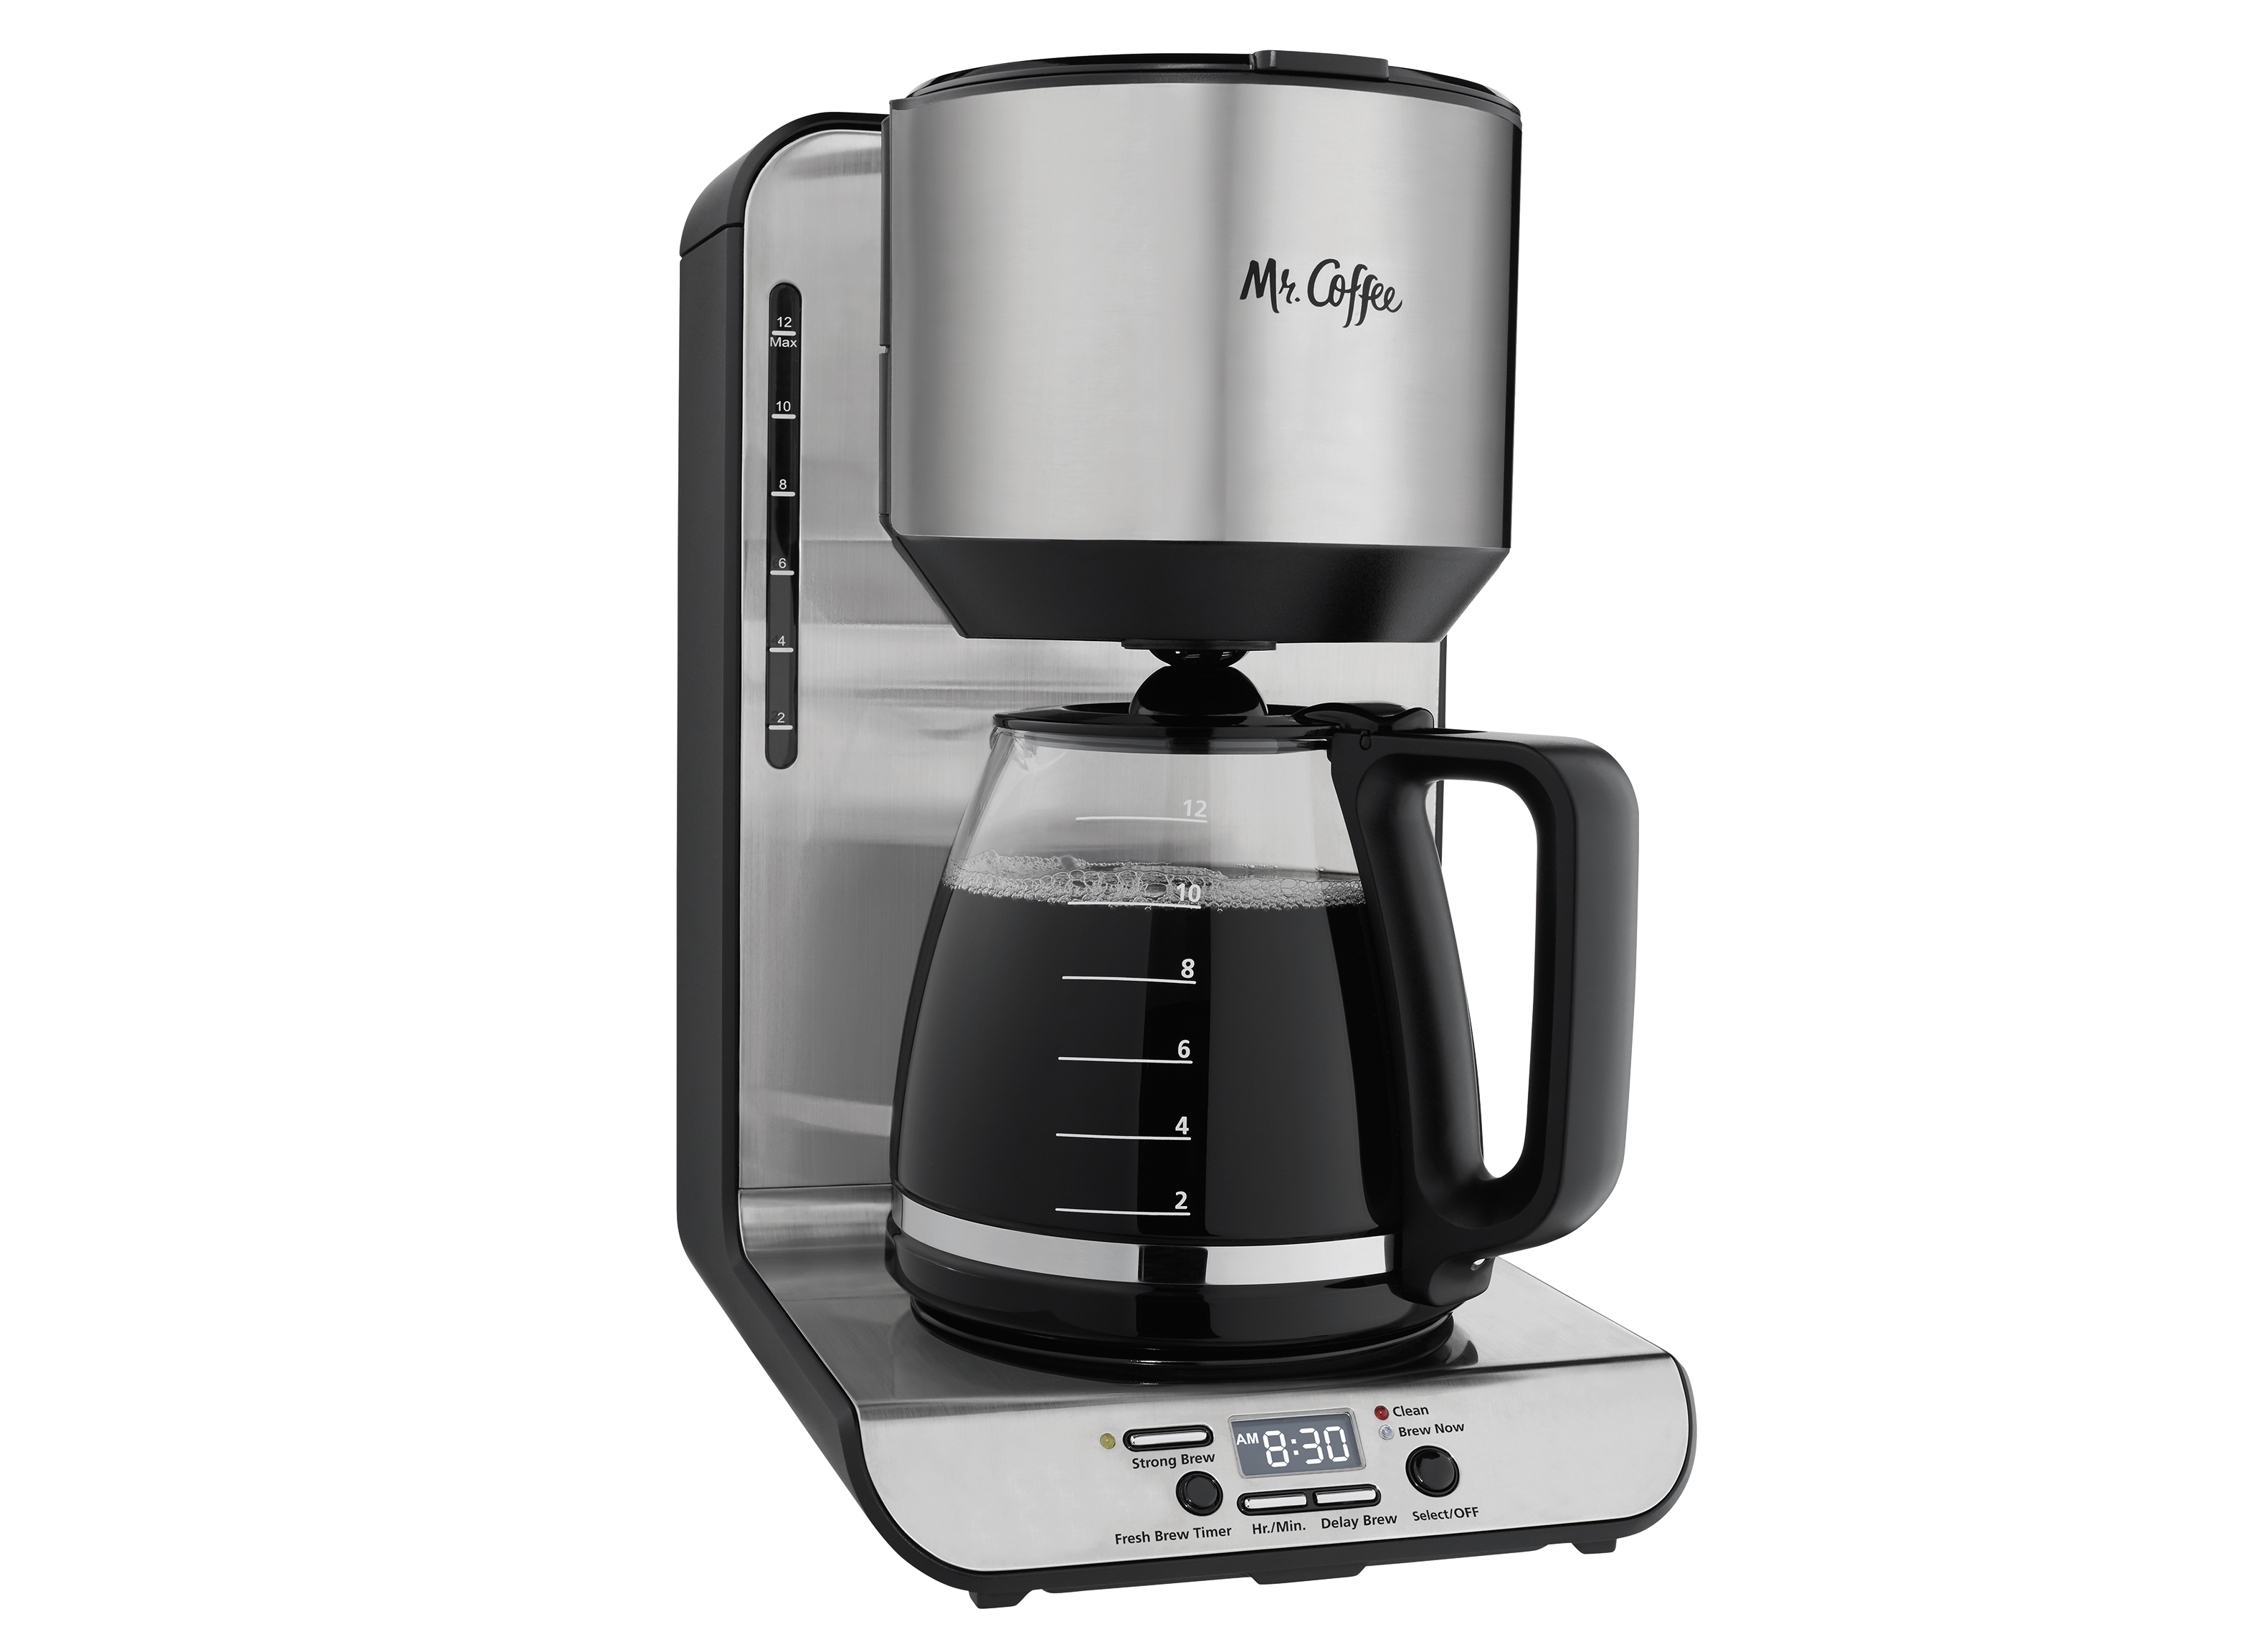 https://crdms.images.consumerreports.org/prod/products/cr/models/395406-drip-coffee-makers-with-carafe-mr-coffee-12-cup-programmable-bvmc-fbx39-61371.png